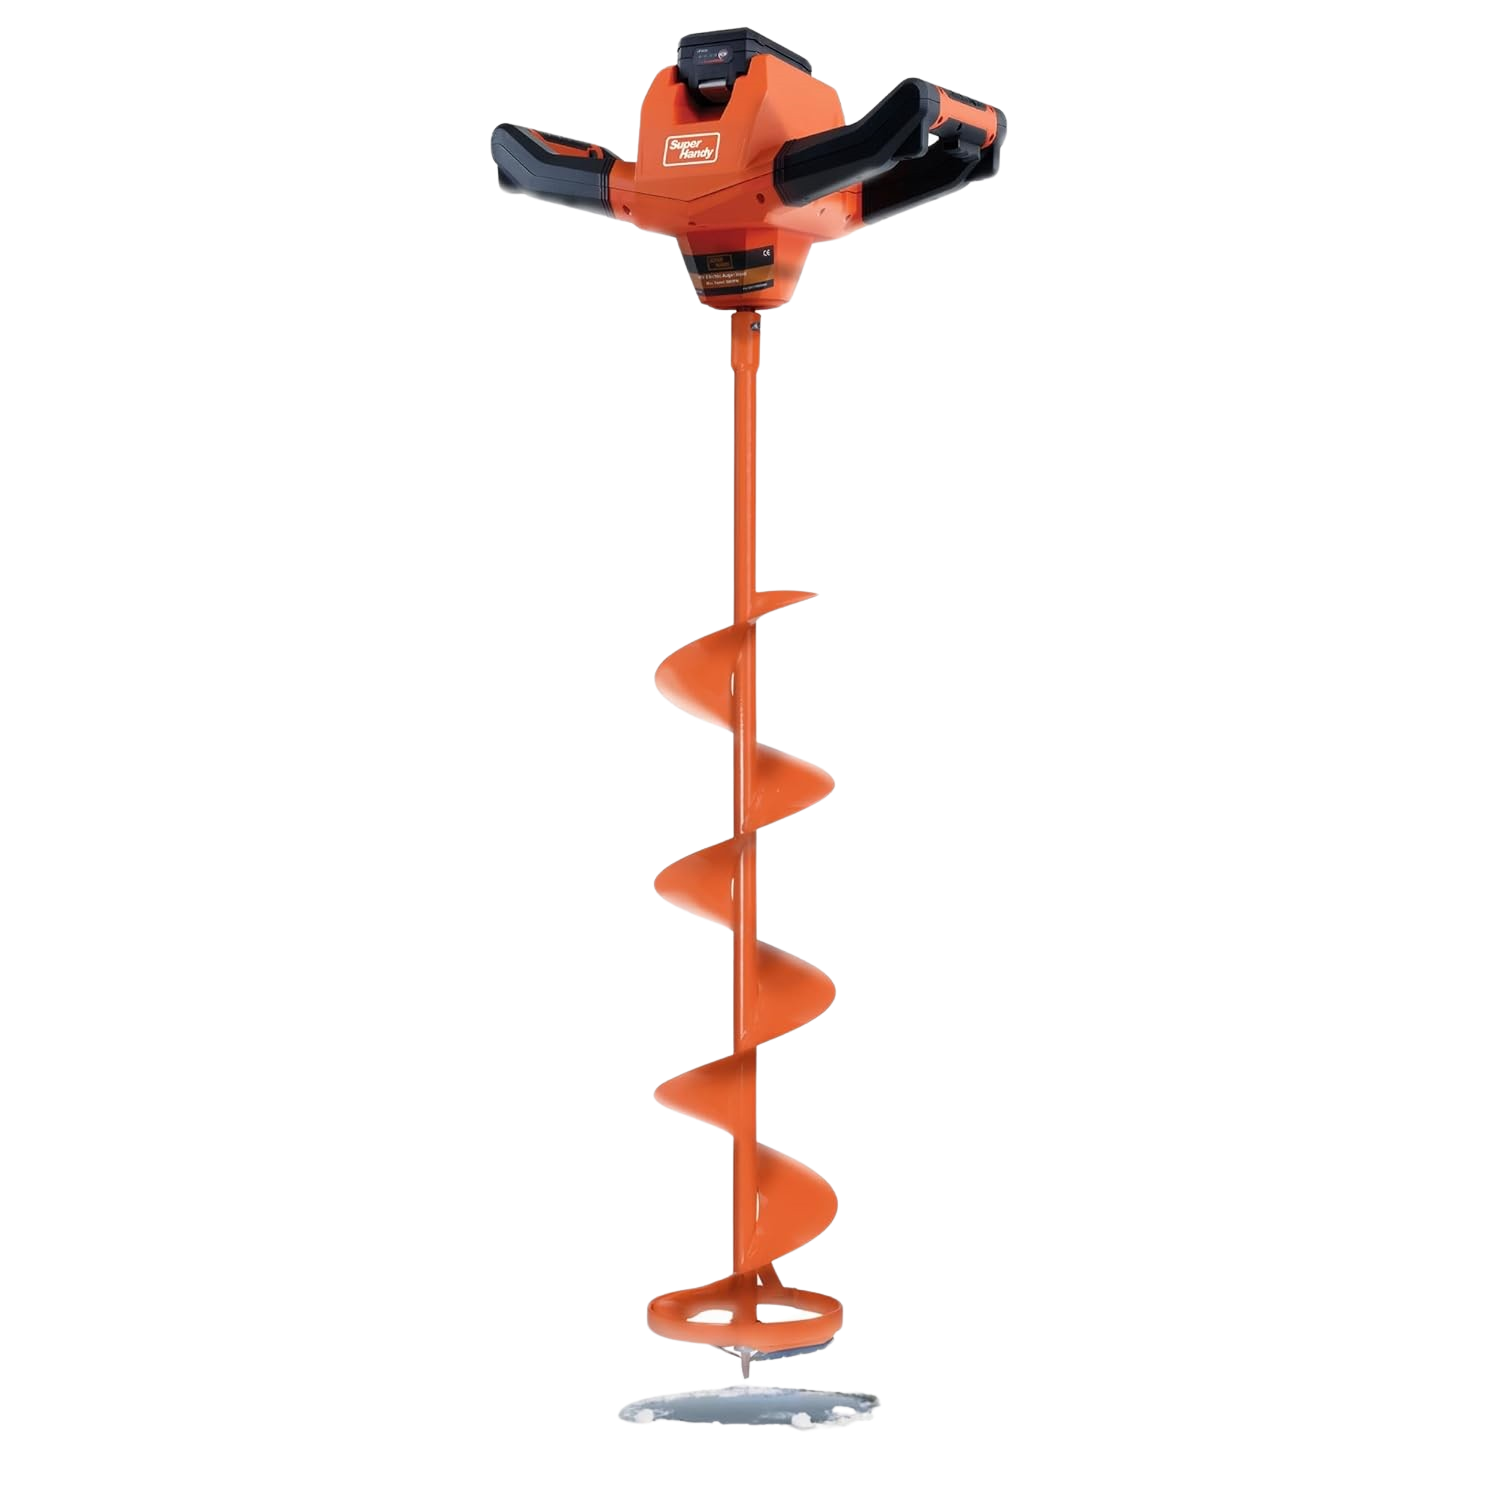 Super Handy GCAO016 Electric Ice Auger 8